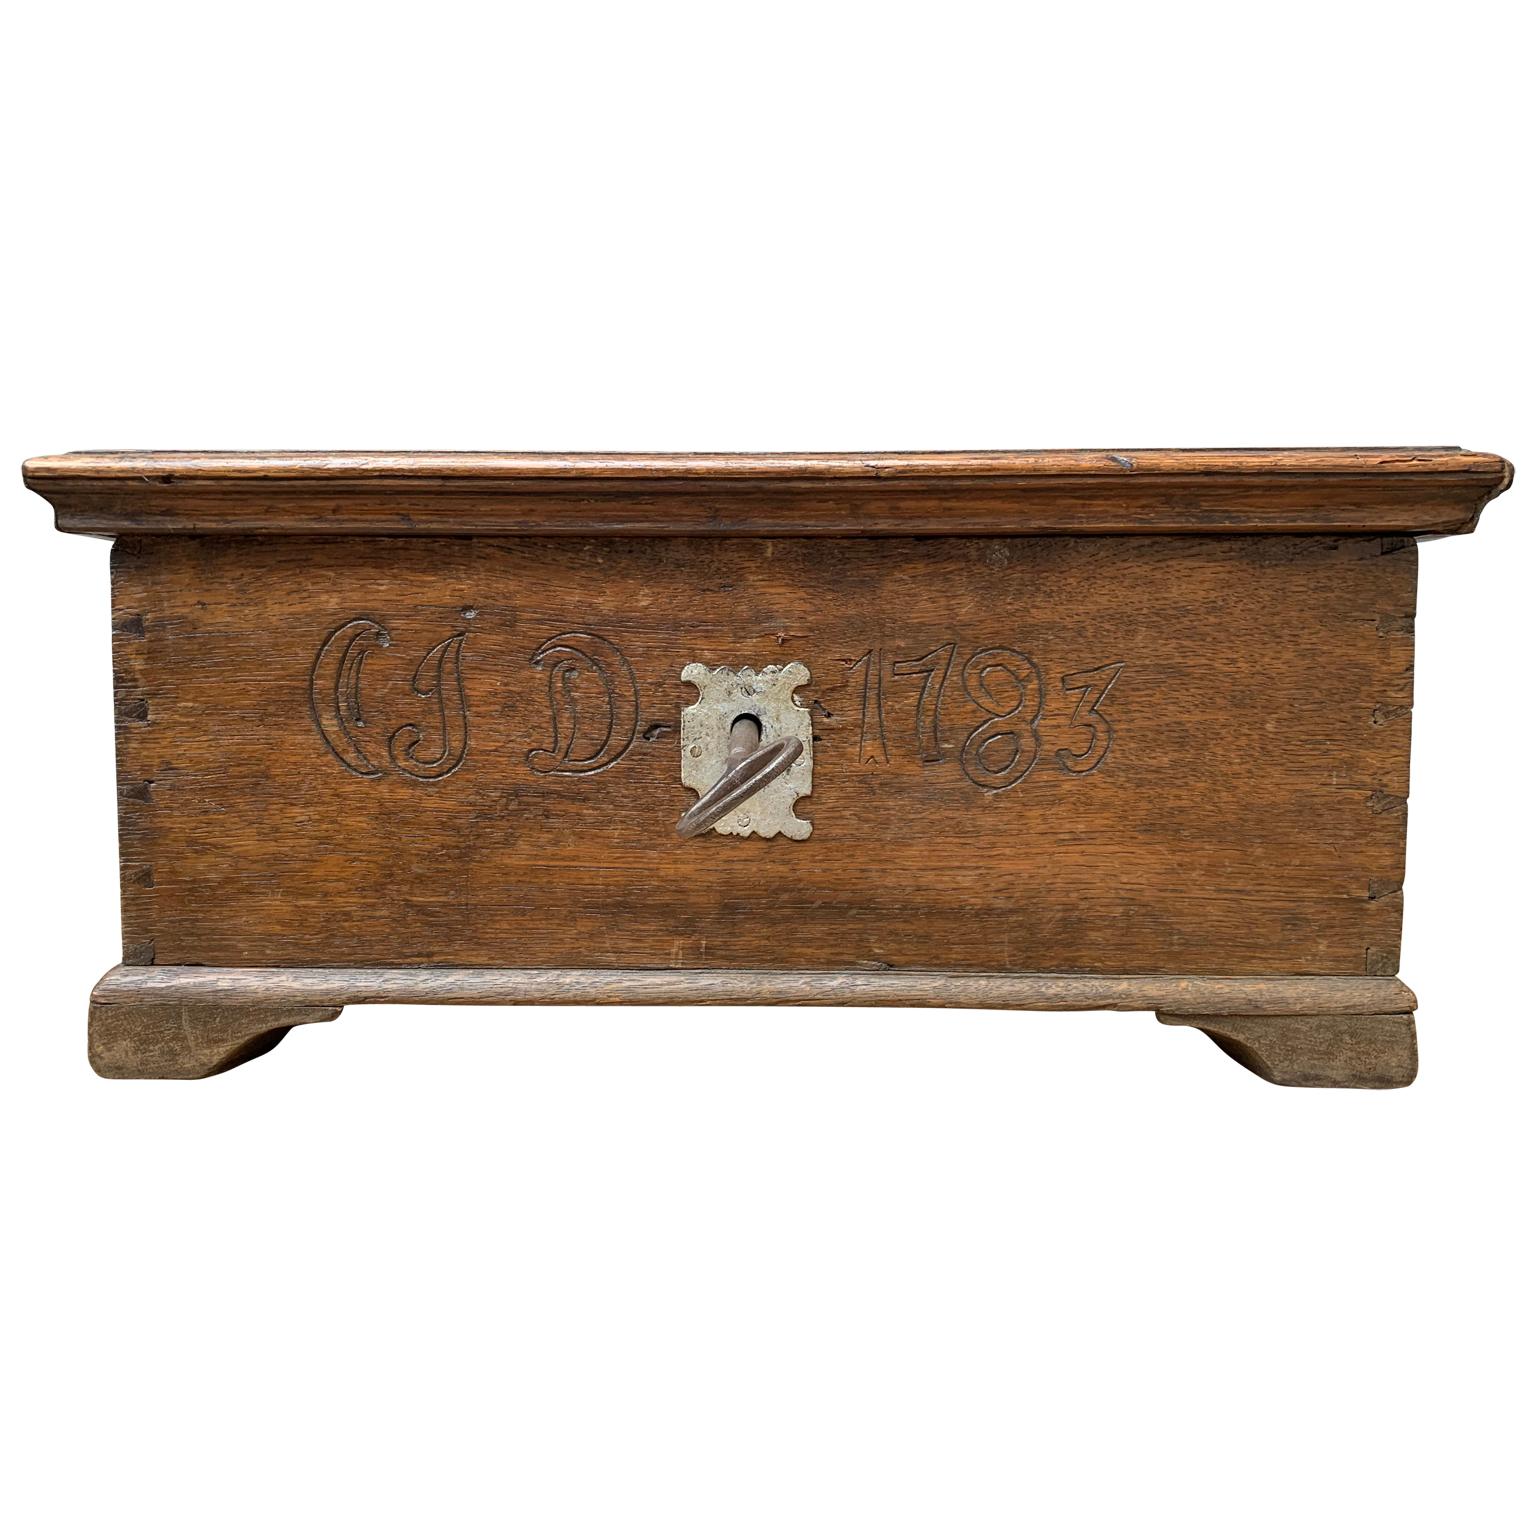 A Swedish oakwood box, dated 1783 and carved with the initial of the girl that received it as a gift (CSD). Most probably as bridal gift from her family. Lock and key original and working (request video).